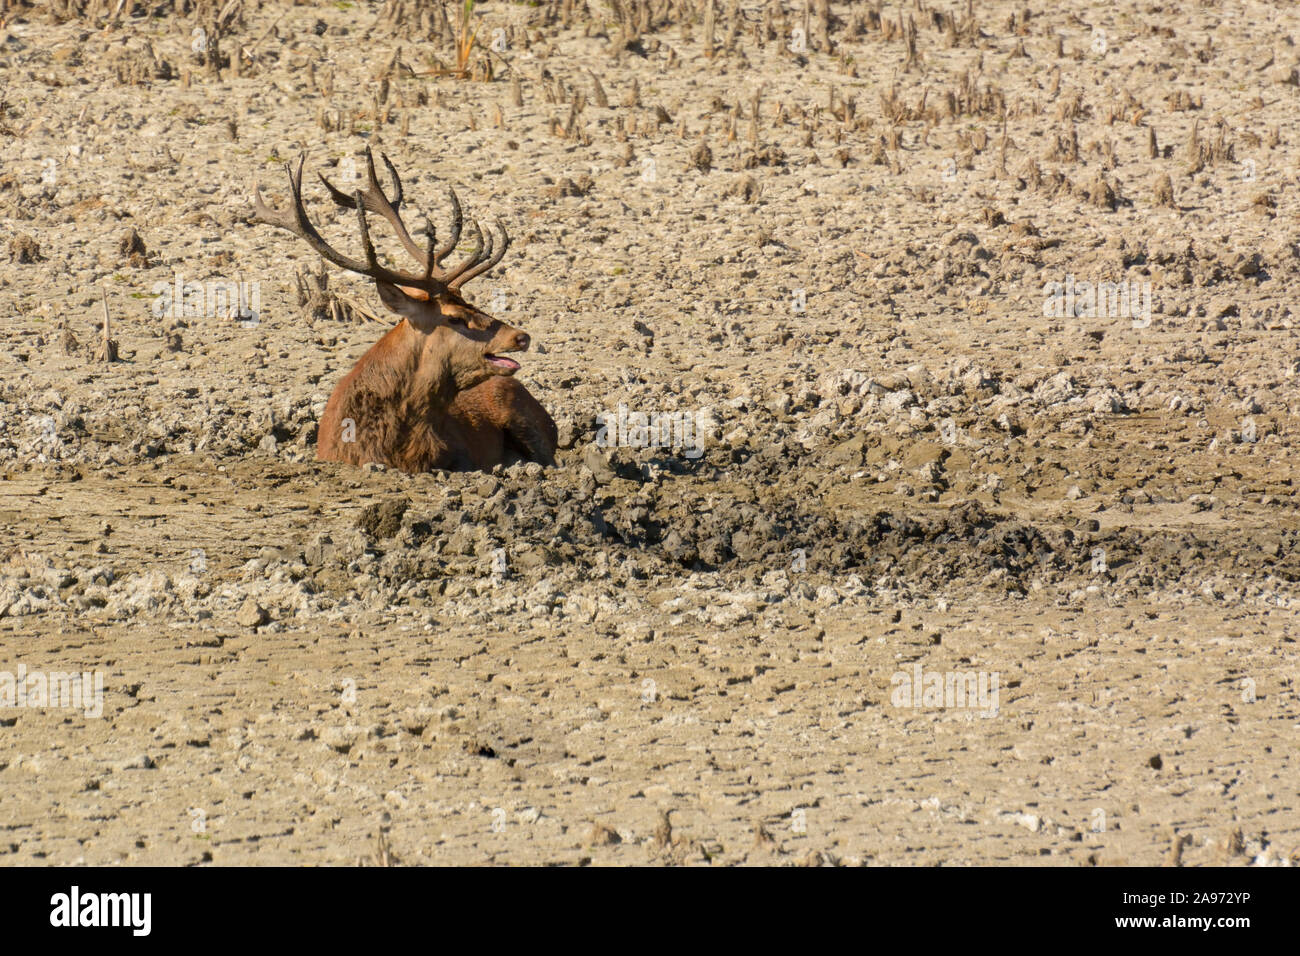 deer taking a mud bath to remove parasites Stock Photo